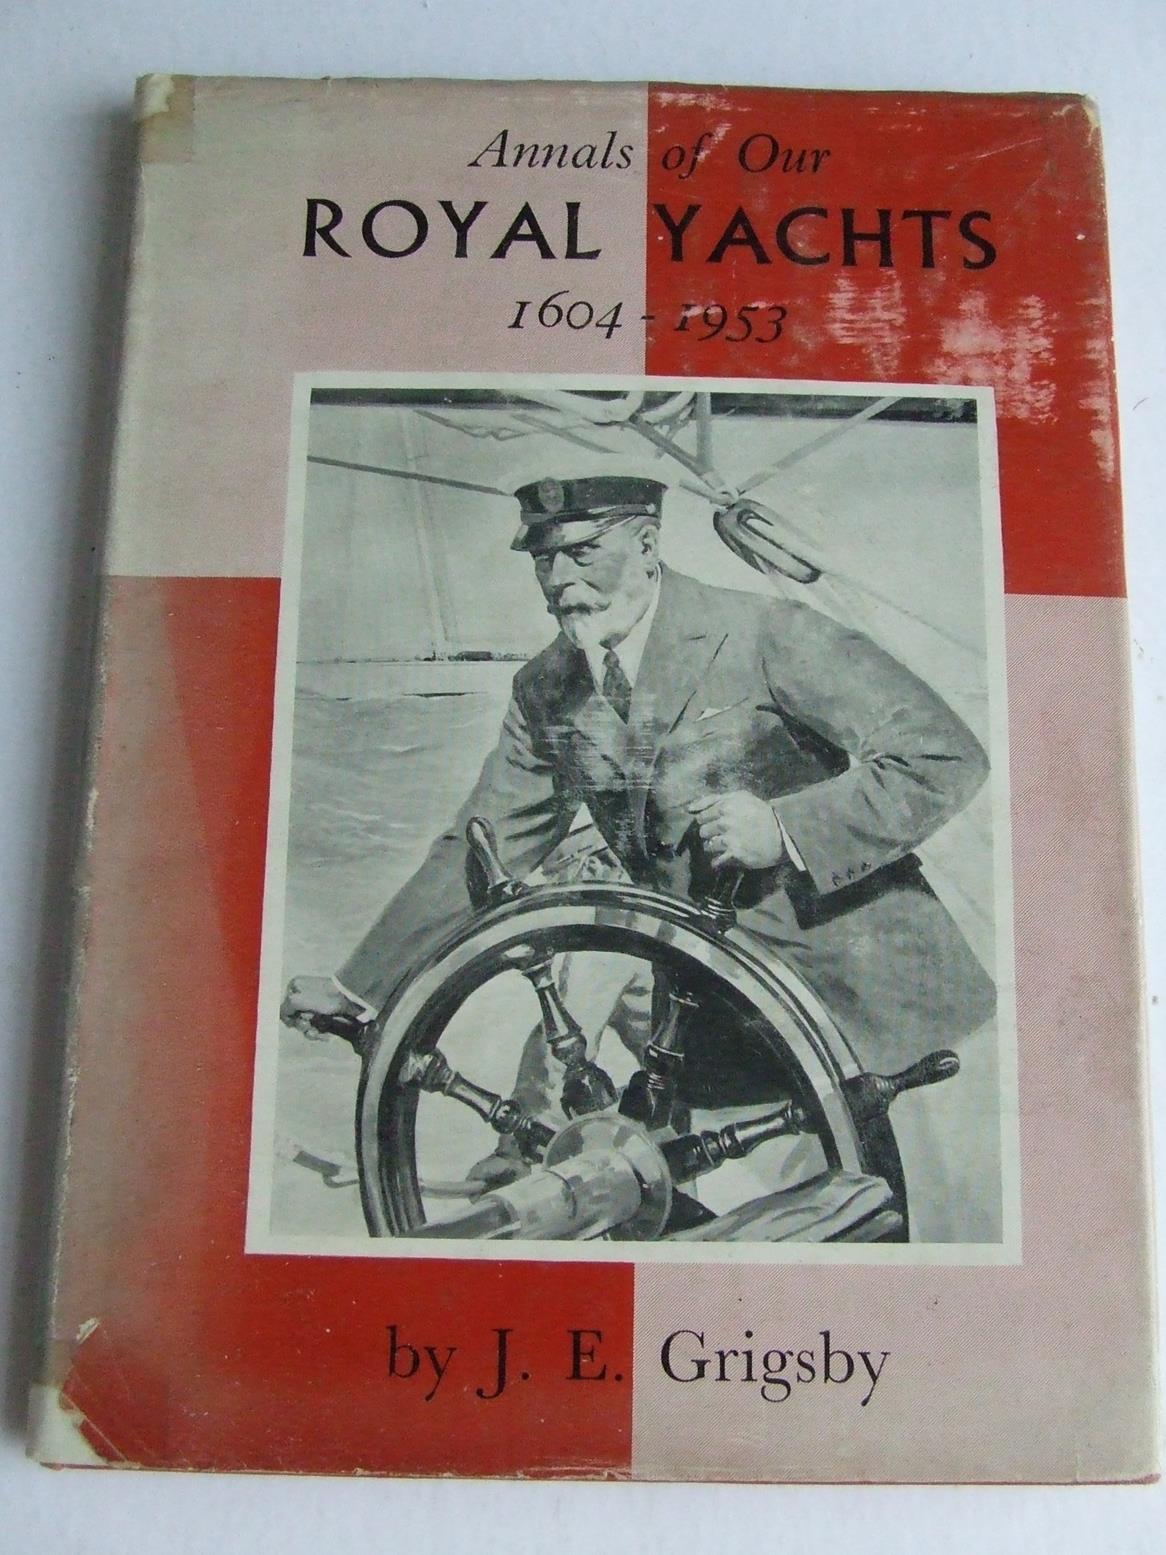 Annals of our Royal Yachts 1604-1953